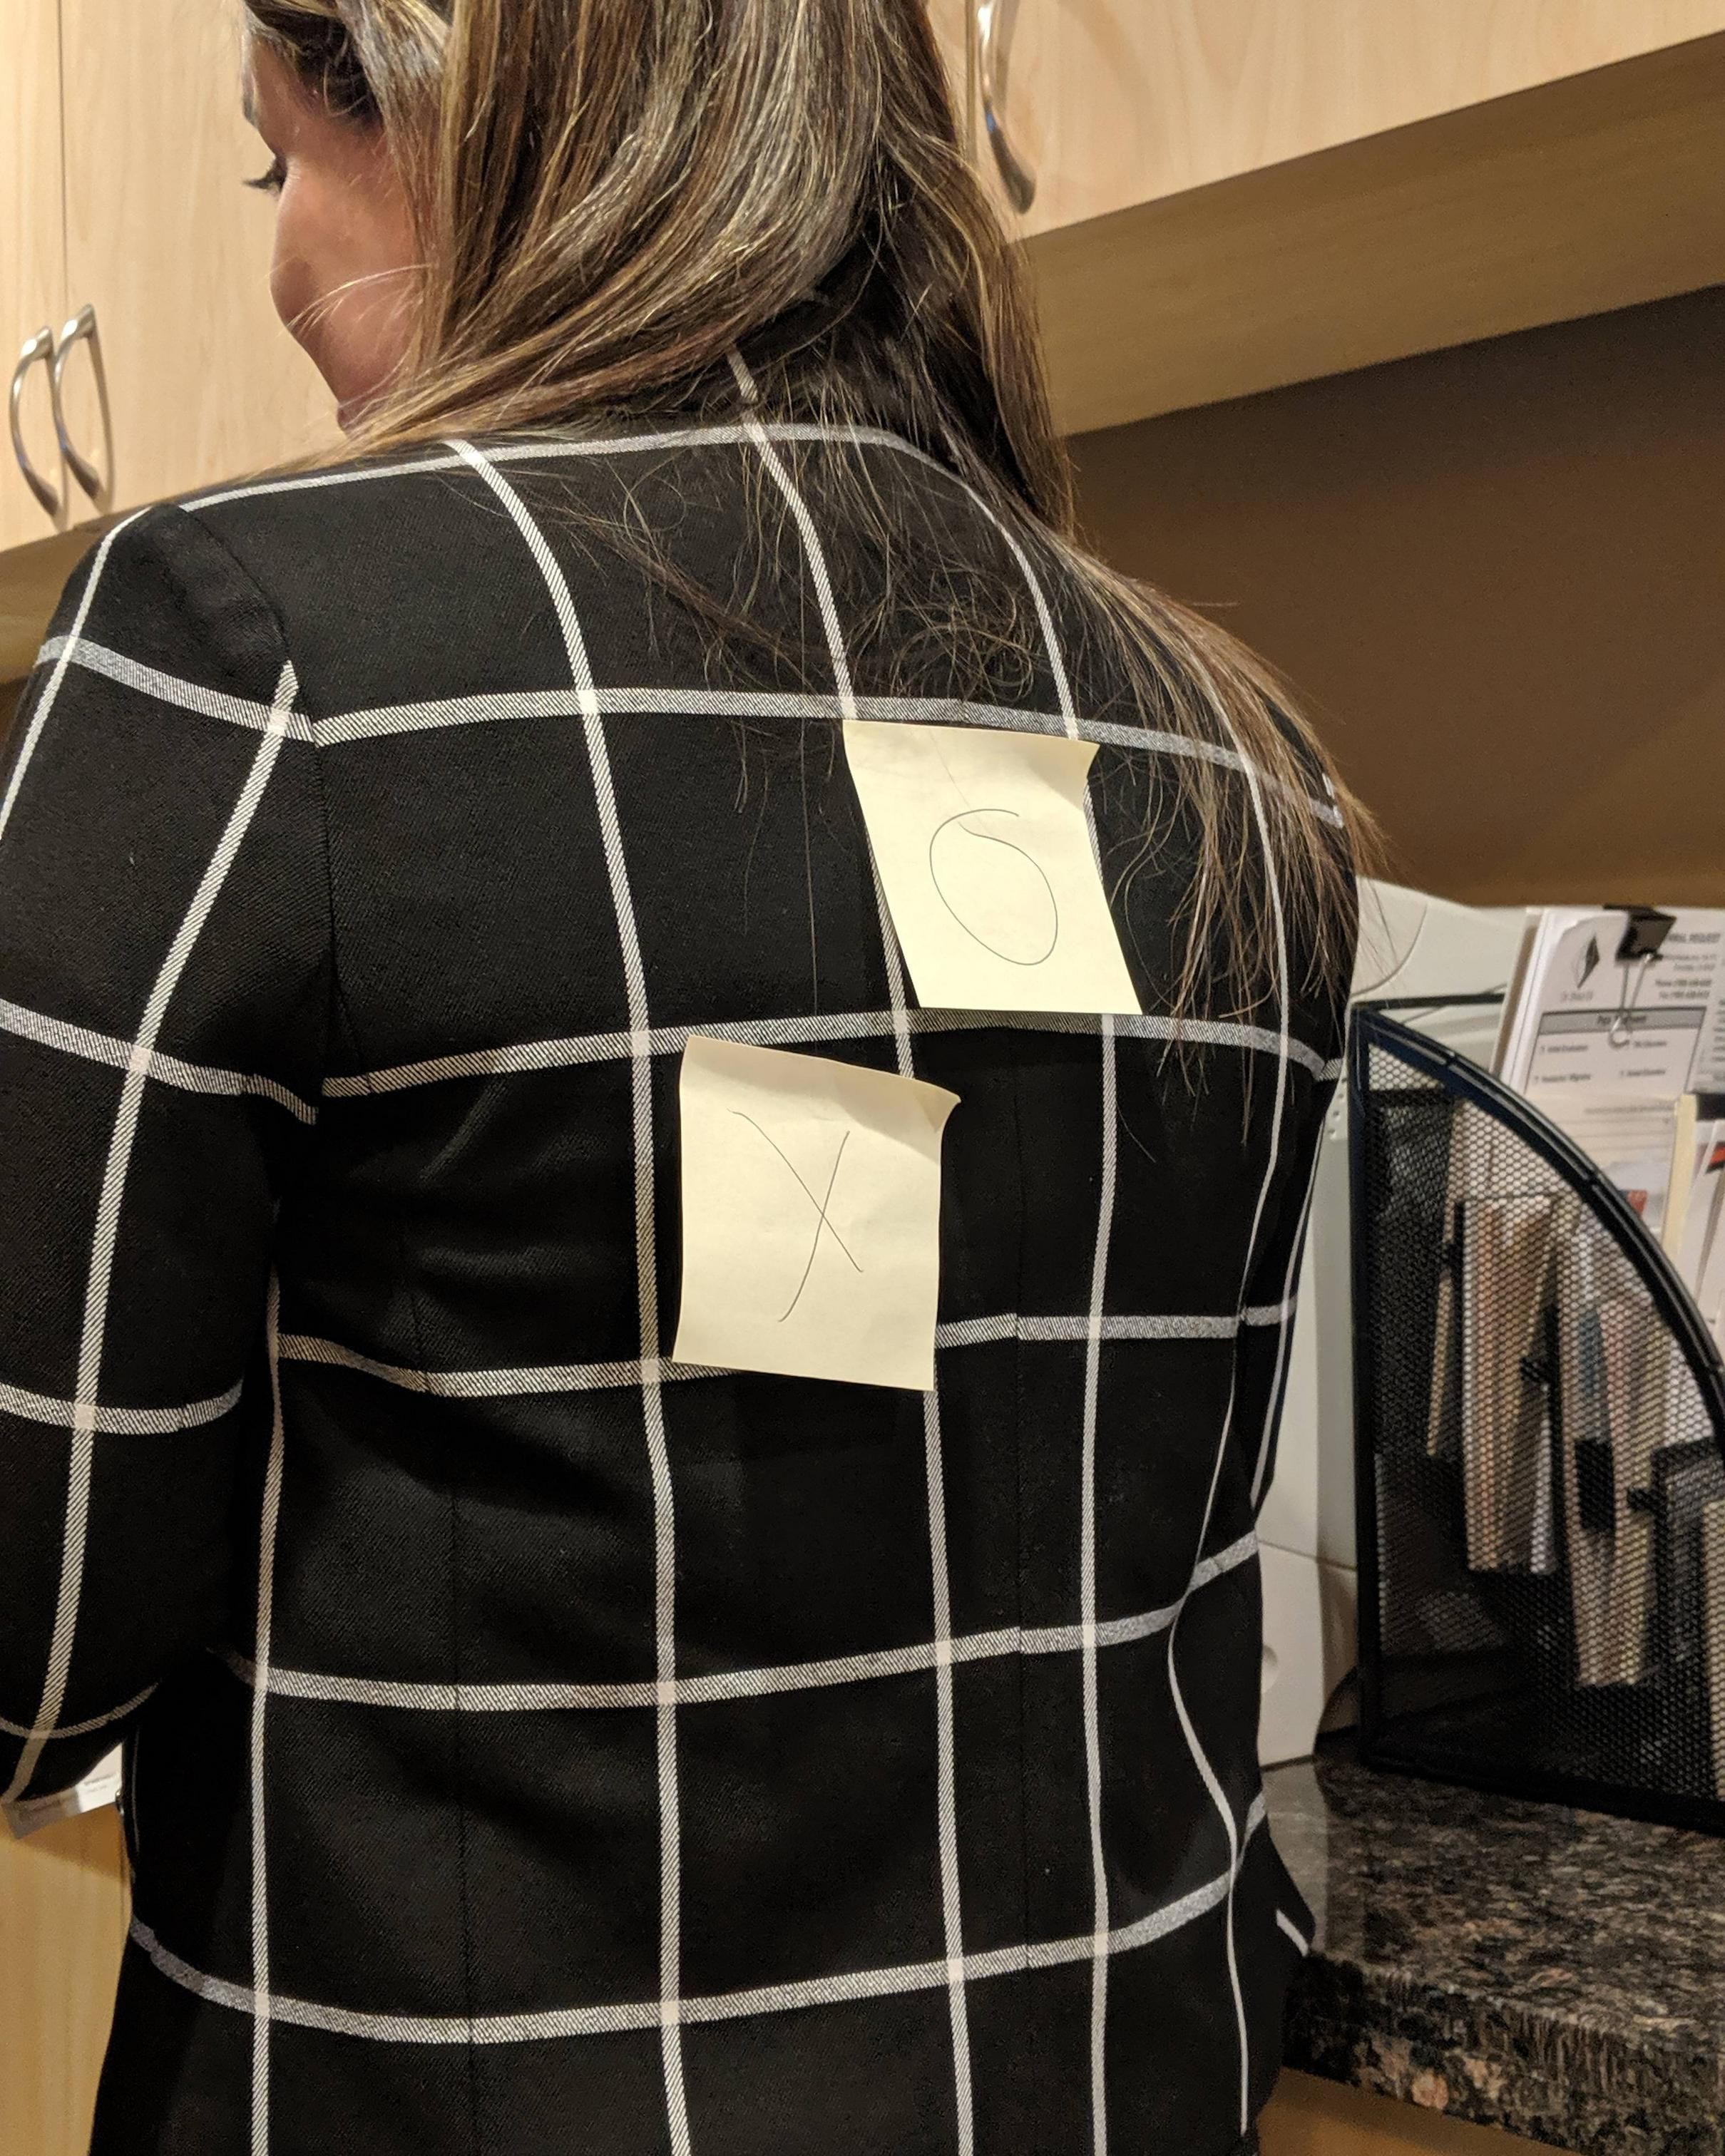 My coworker wore a checkered suit today. Unfortunately she didn't let us finish.